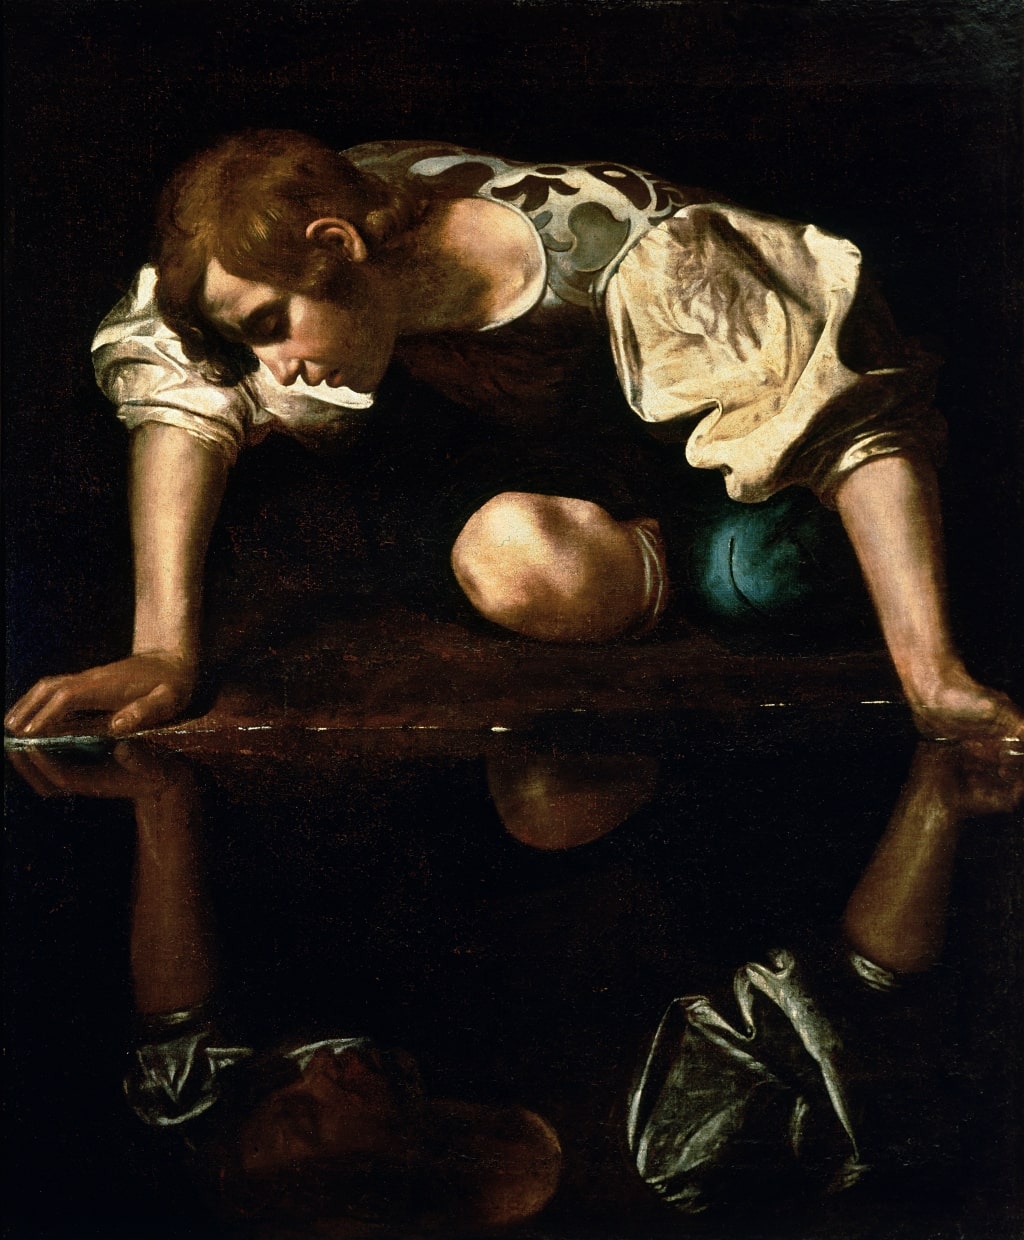 Narcissus depicted by Caravaggio